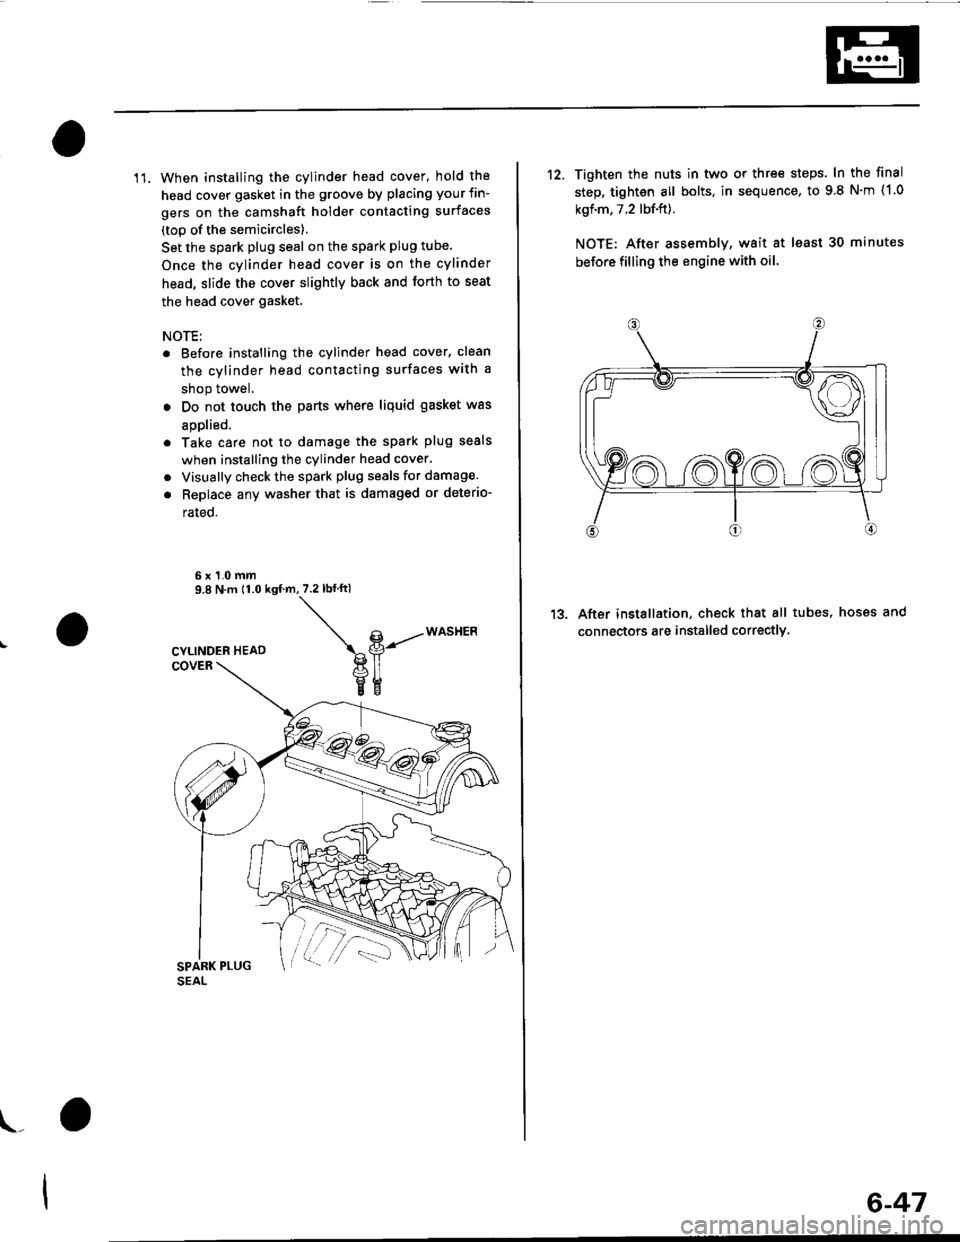 HONDA CIVIC 1998 6.G Workshop Manual 11. When installing the cylinder head cover, hold the
head cover gasket in the groove by placing your fin-
gers on the camshaft holder contacting surfaces
(top of the semicircles)
Set the spark plug s